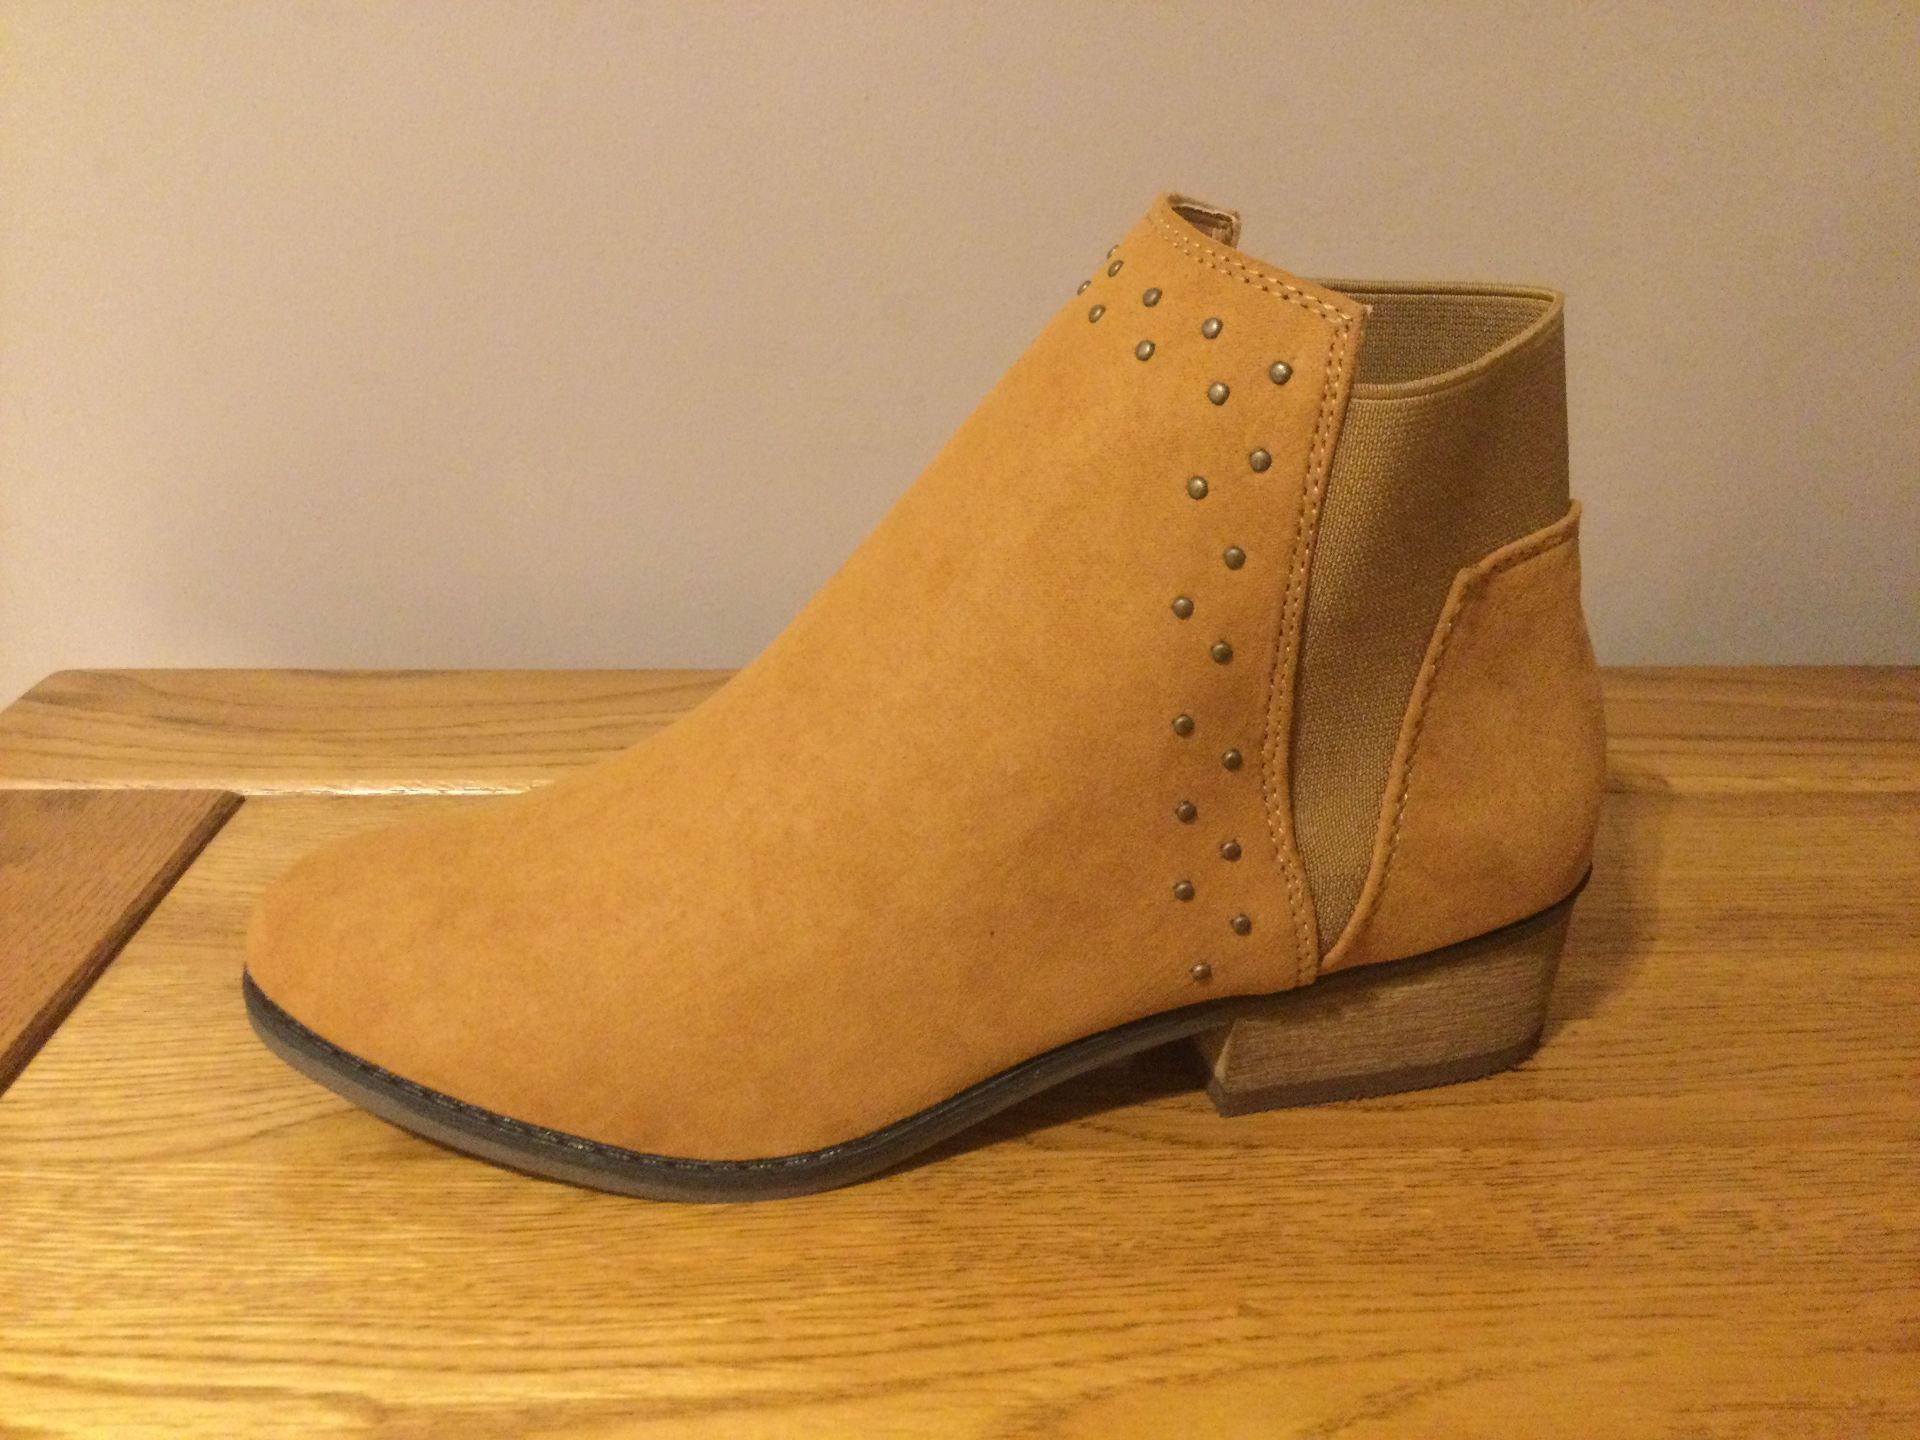 Dolcis “Wendy” Low Heel Ankle Boots, Size 6, Tan - New RRP £45.99 - Image 3 of 7